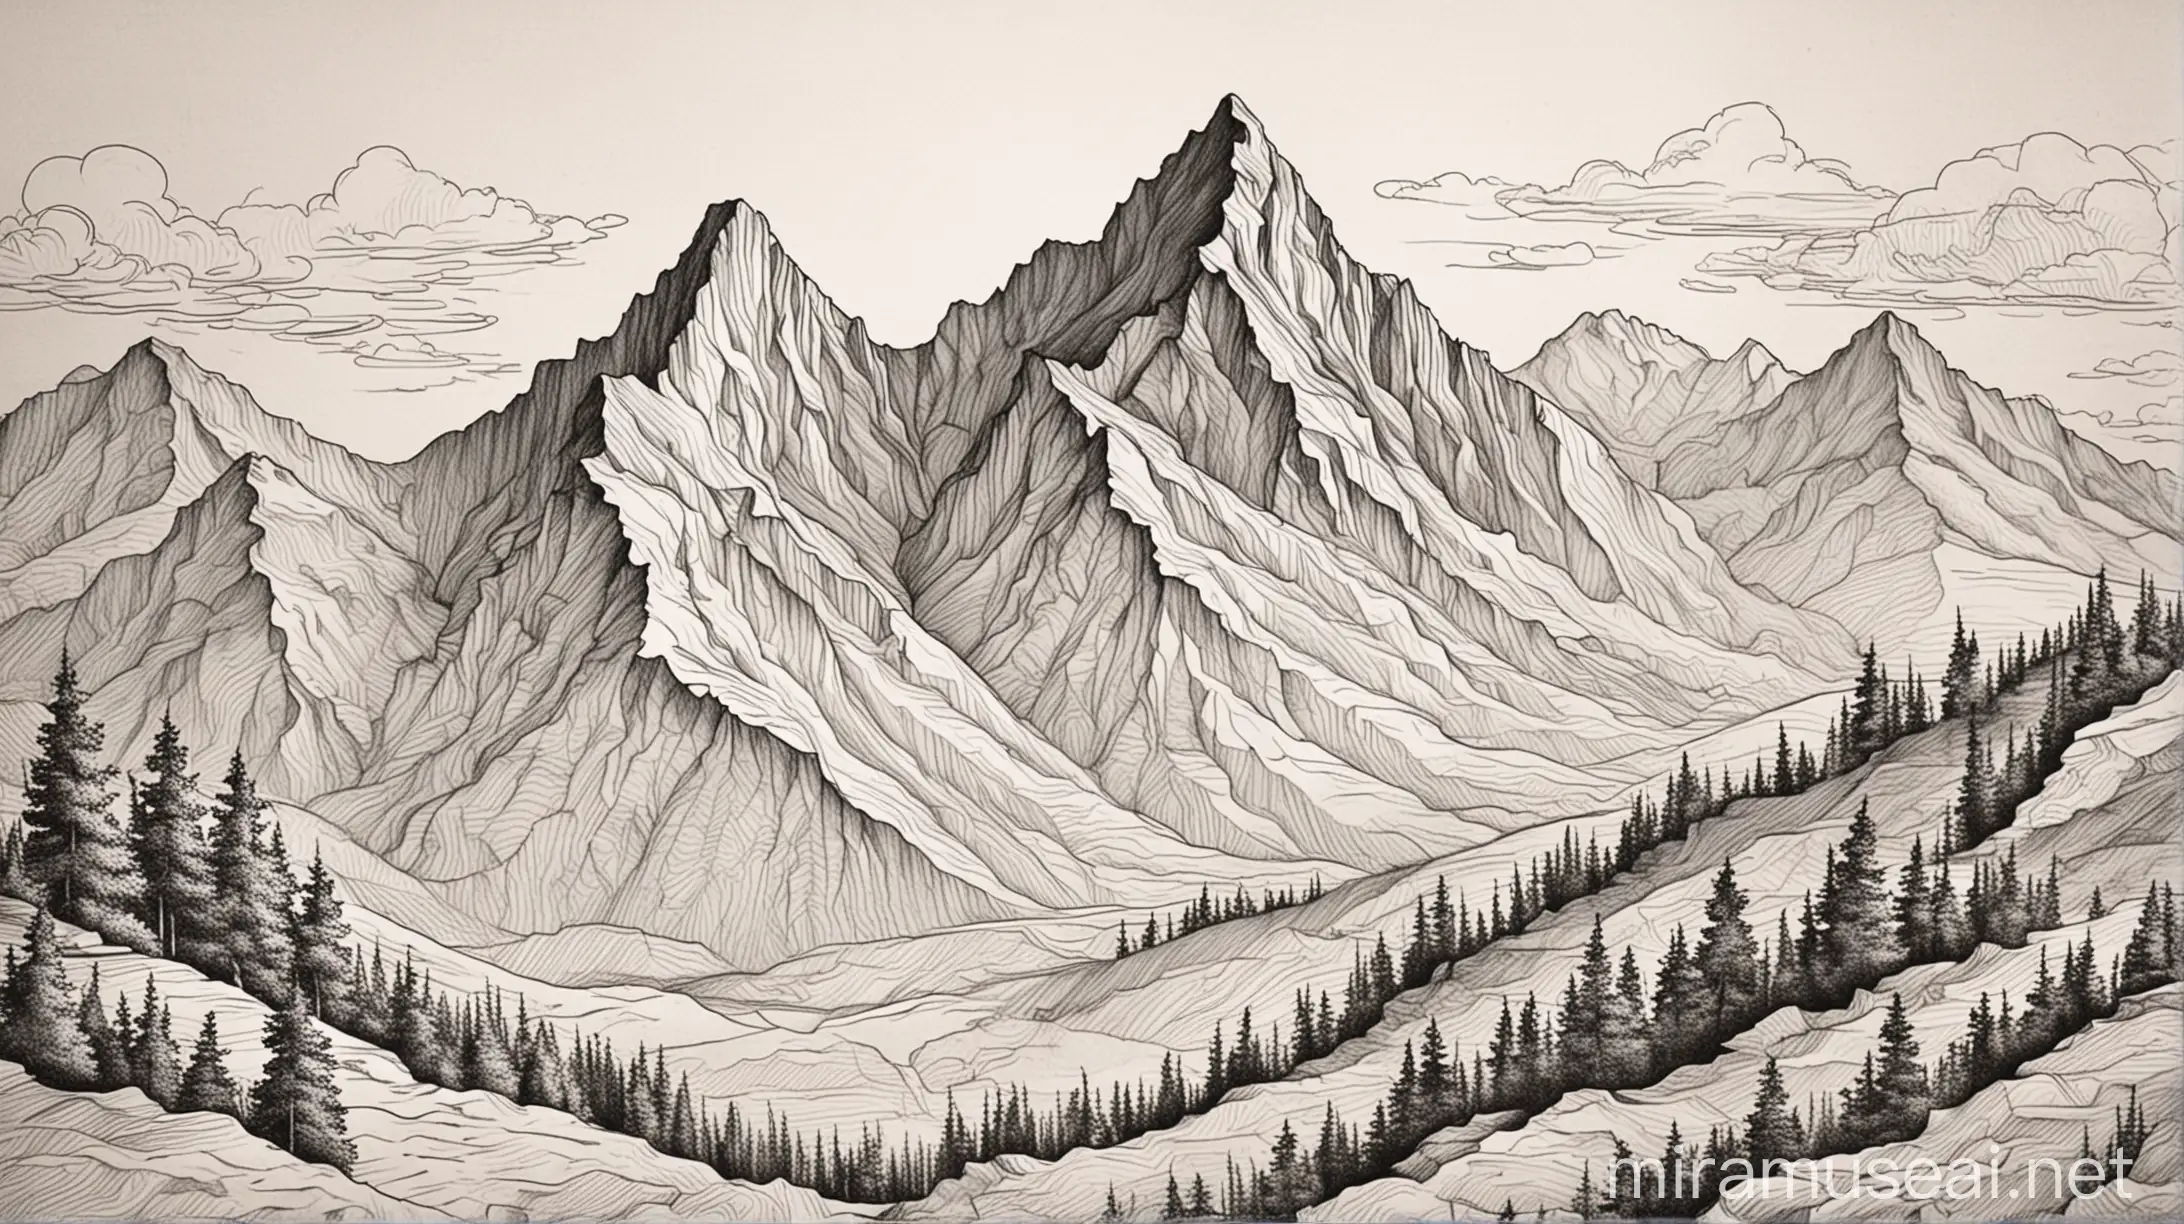 make this mountains contoured line art 
make this drawing super simple without color
leave only  mountains in the back and delete the front stuff
leave only mountains

no trees 


